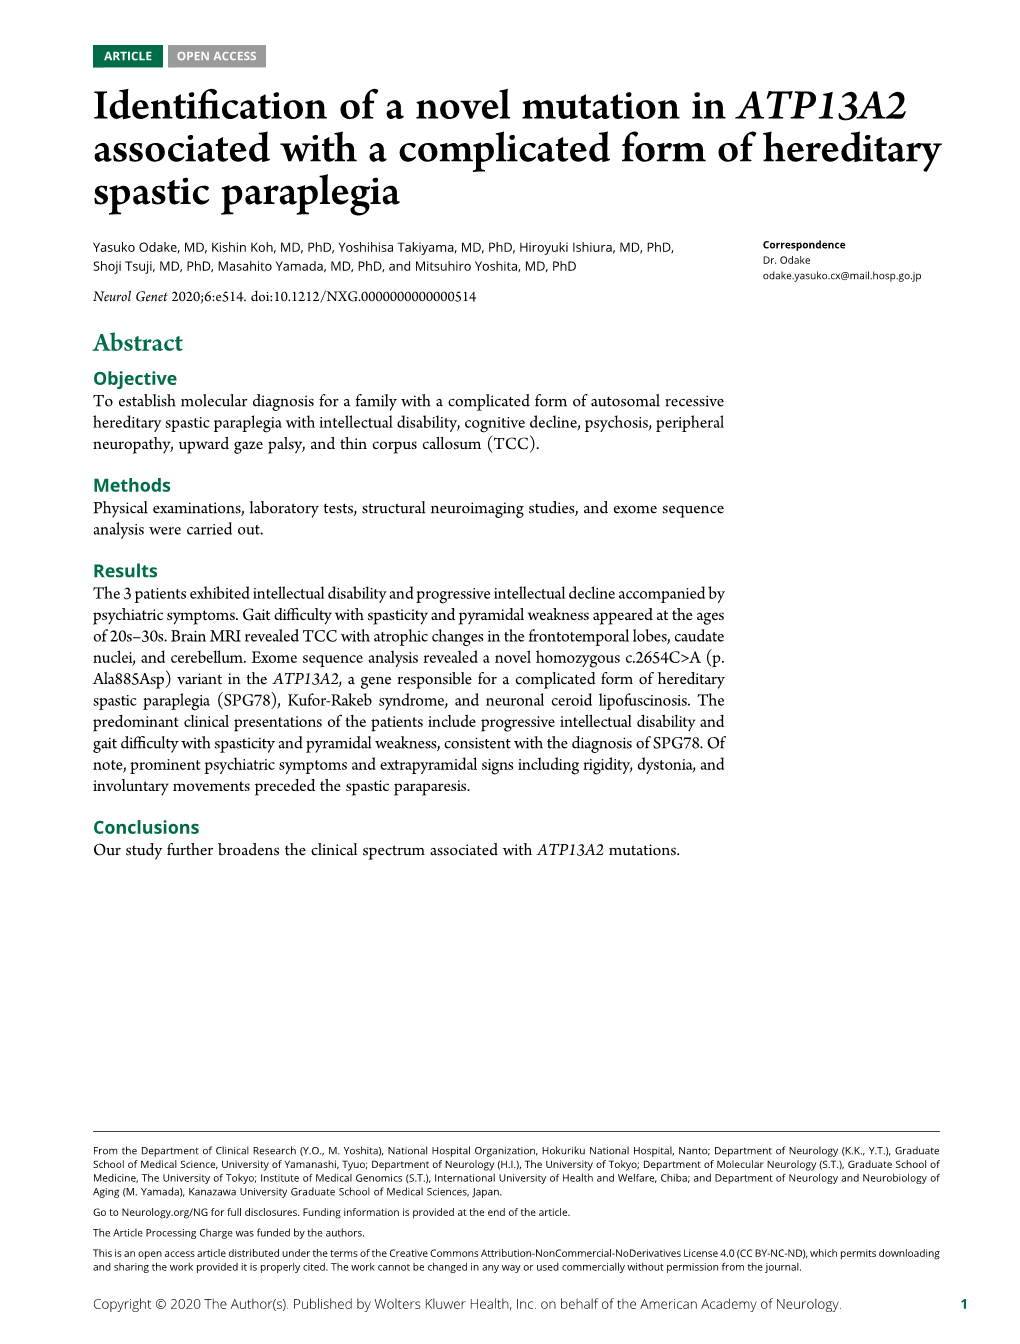 ATP13A2 Associated with a Complicated Form of Hereditary Spastic Paraplegia